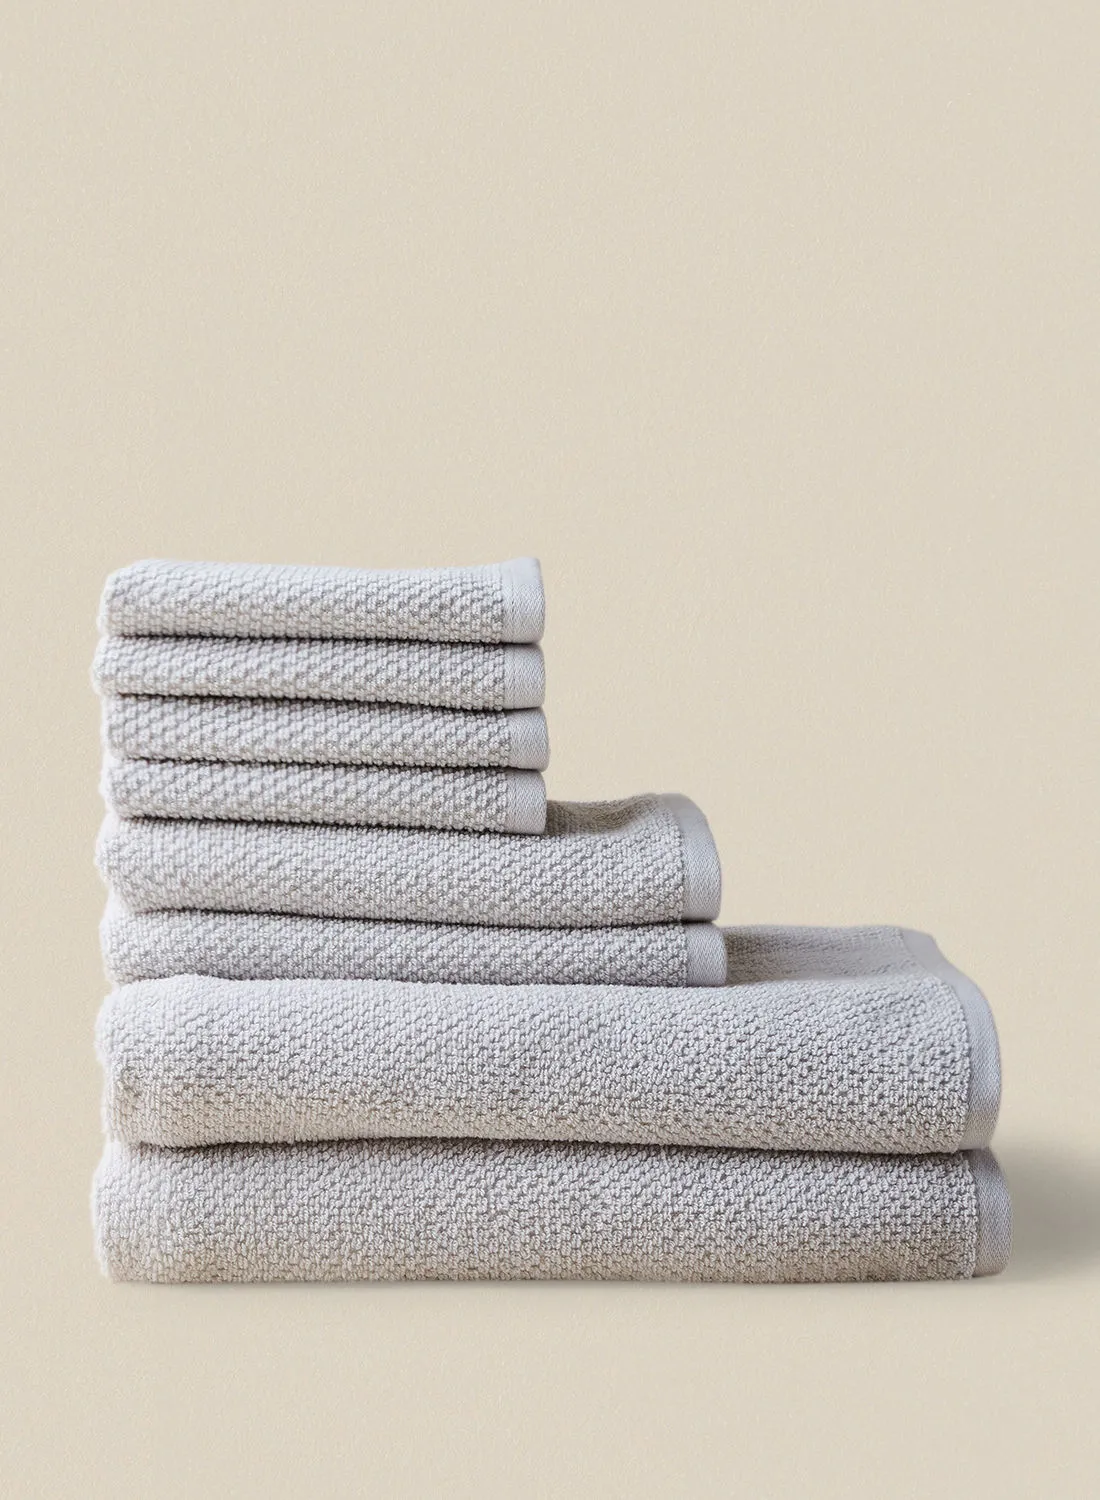 noon east 8 Piece Bathroom Towel Set - 500 GSM 100% Organic Cotton - 2 Hand Towel - 4 Face Towel - 2 Bath Towel - Soft Grey Color - Highly Absorbent - Fast Dry